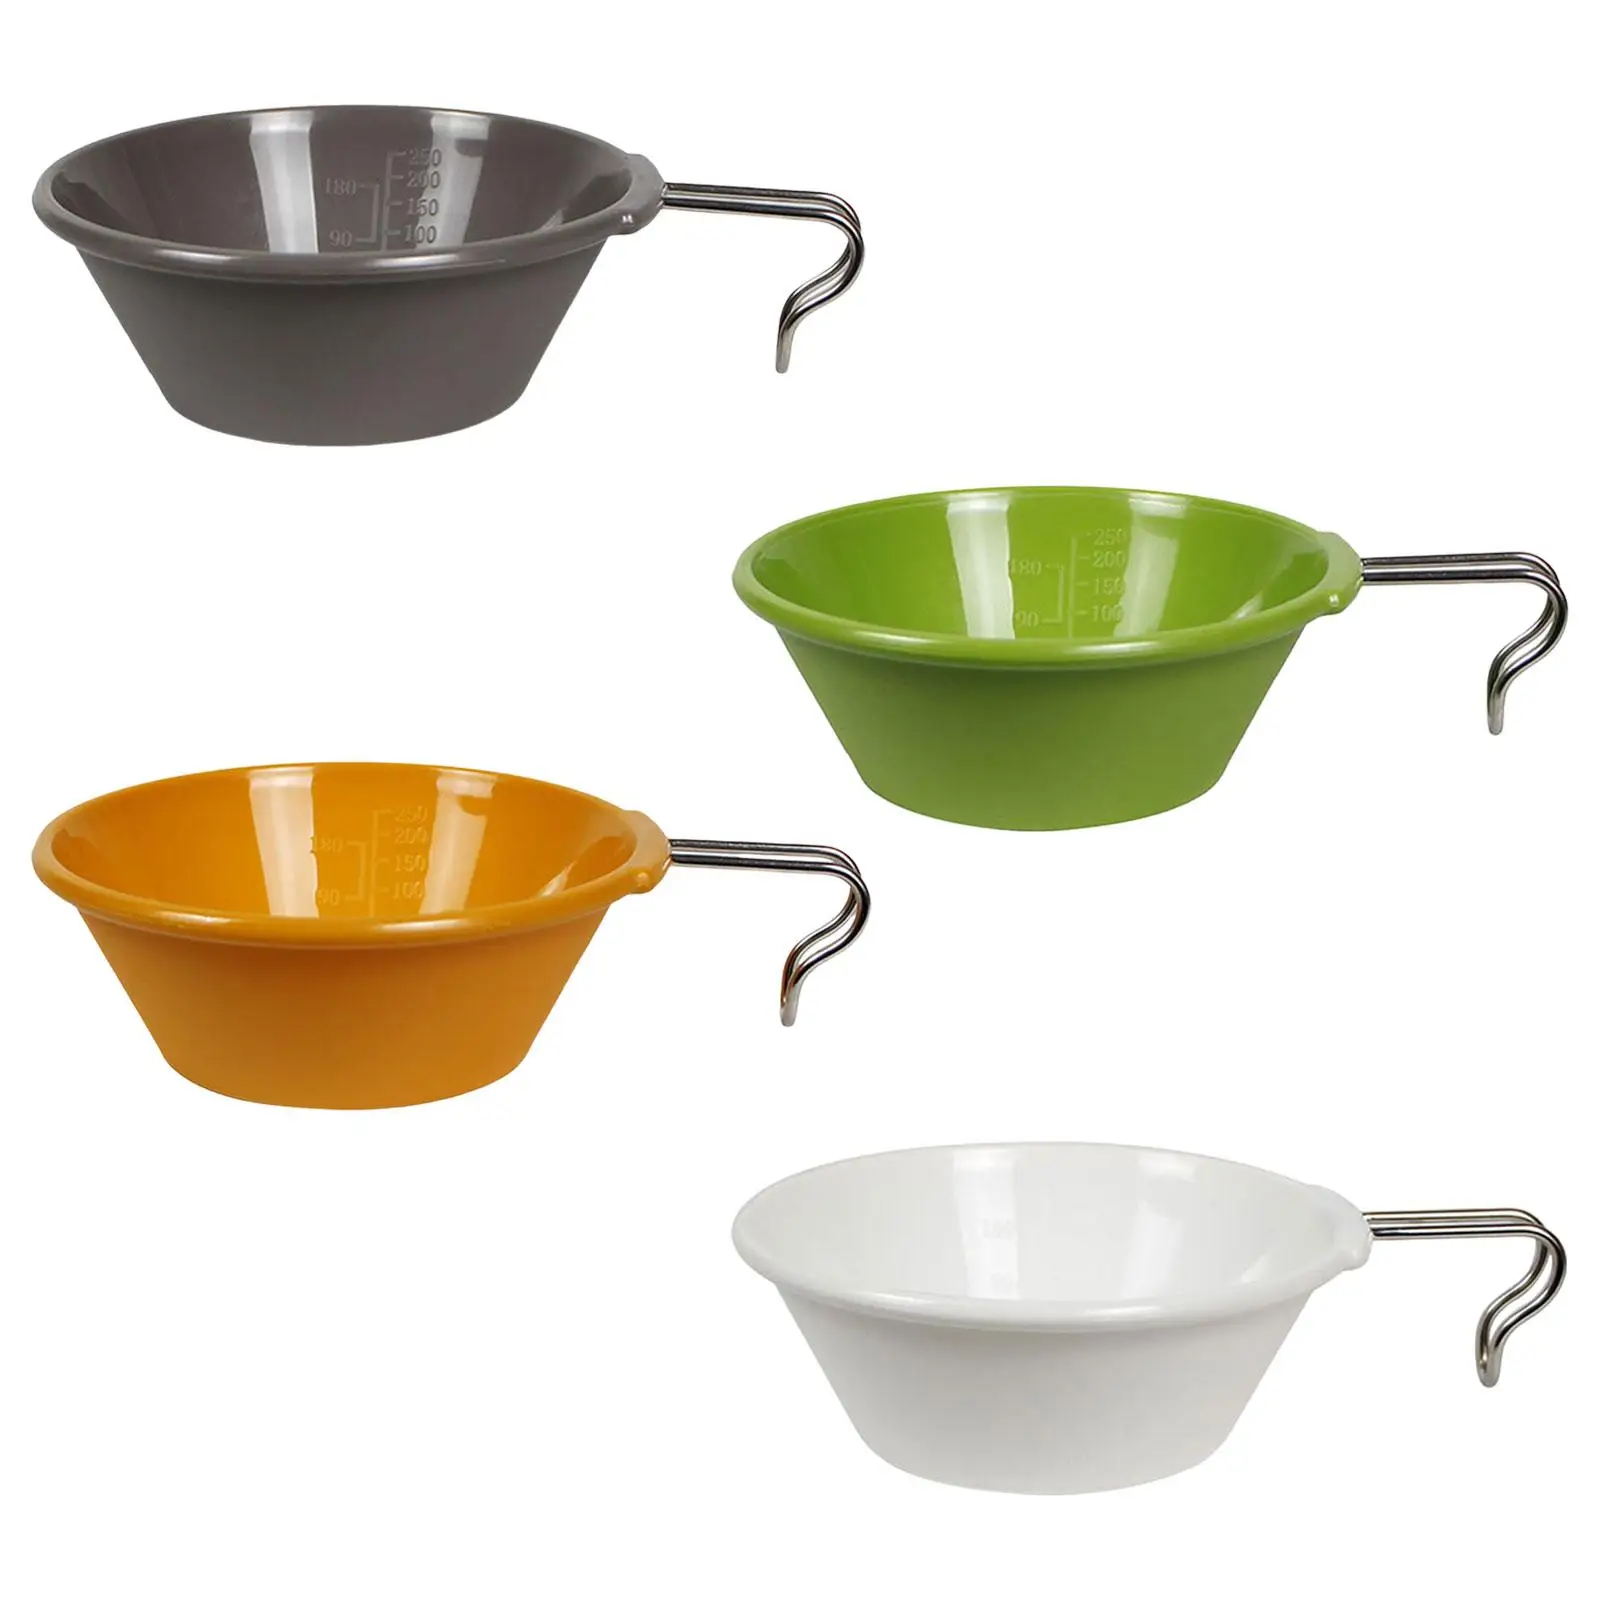 Portable Camping Bowl Utensil Outdoor Dinnerware for Fishing Barbecue Hiking Green